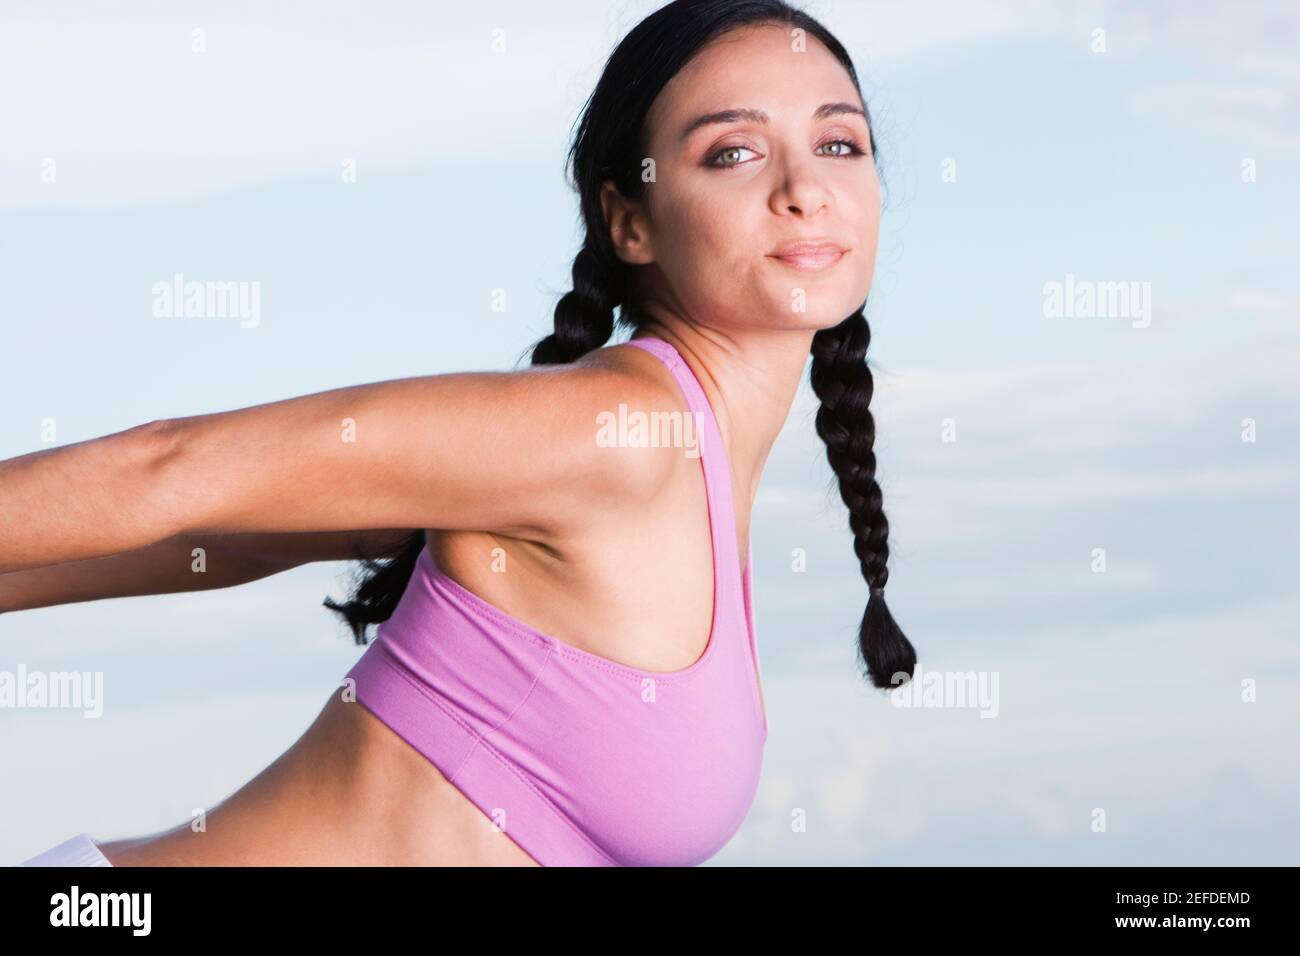 Portrait of a young woman exercising Stock Photo